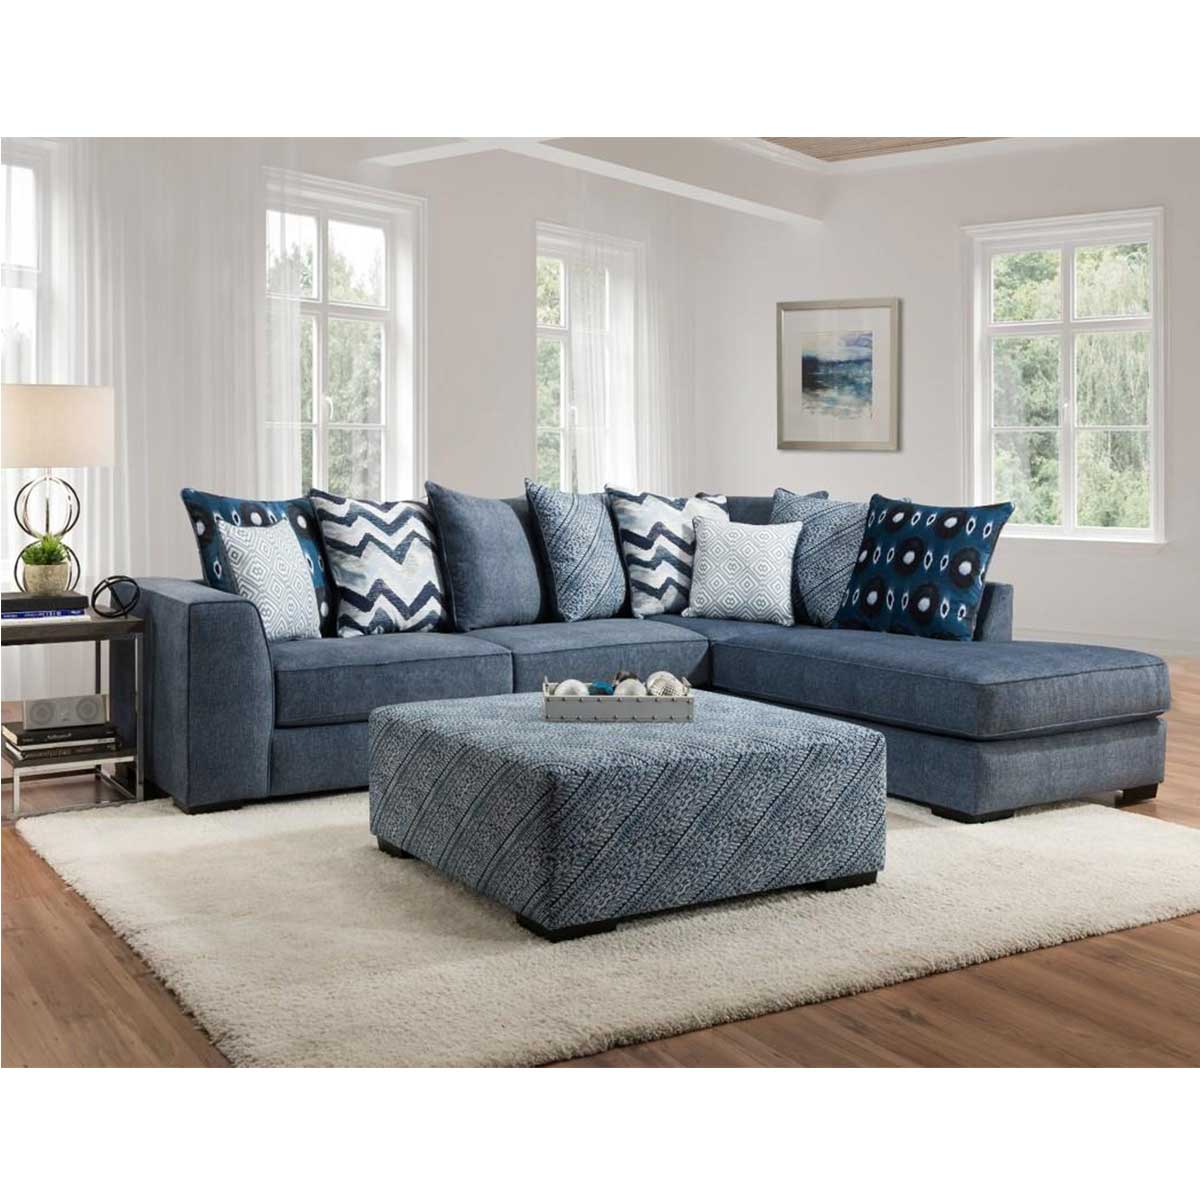 Albany Industries Tussah 2-Piece Sectional Sofa